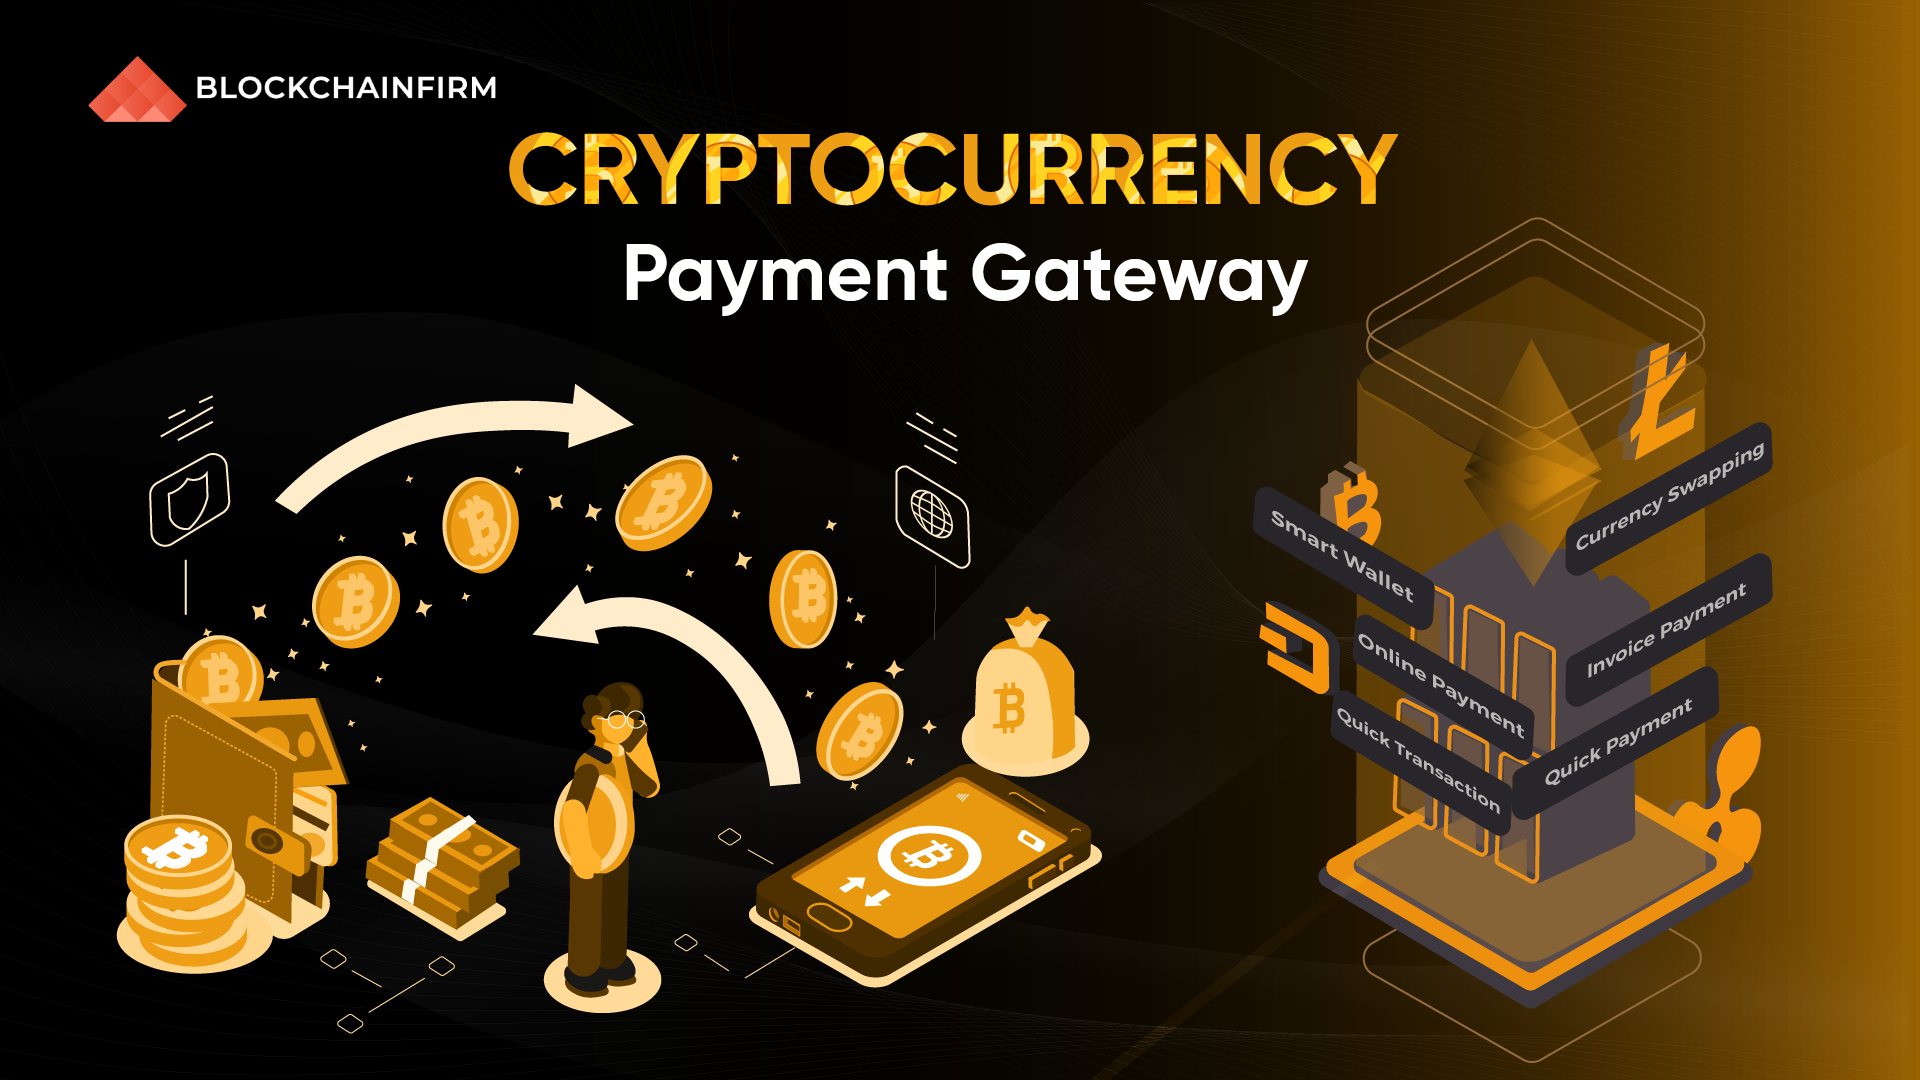 best cryptocurrency payment gateway